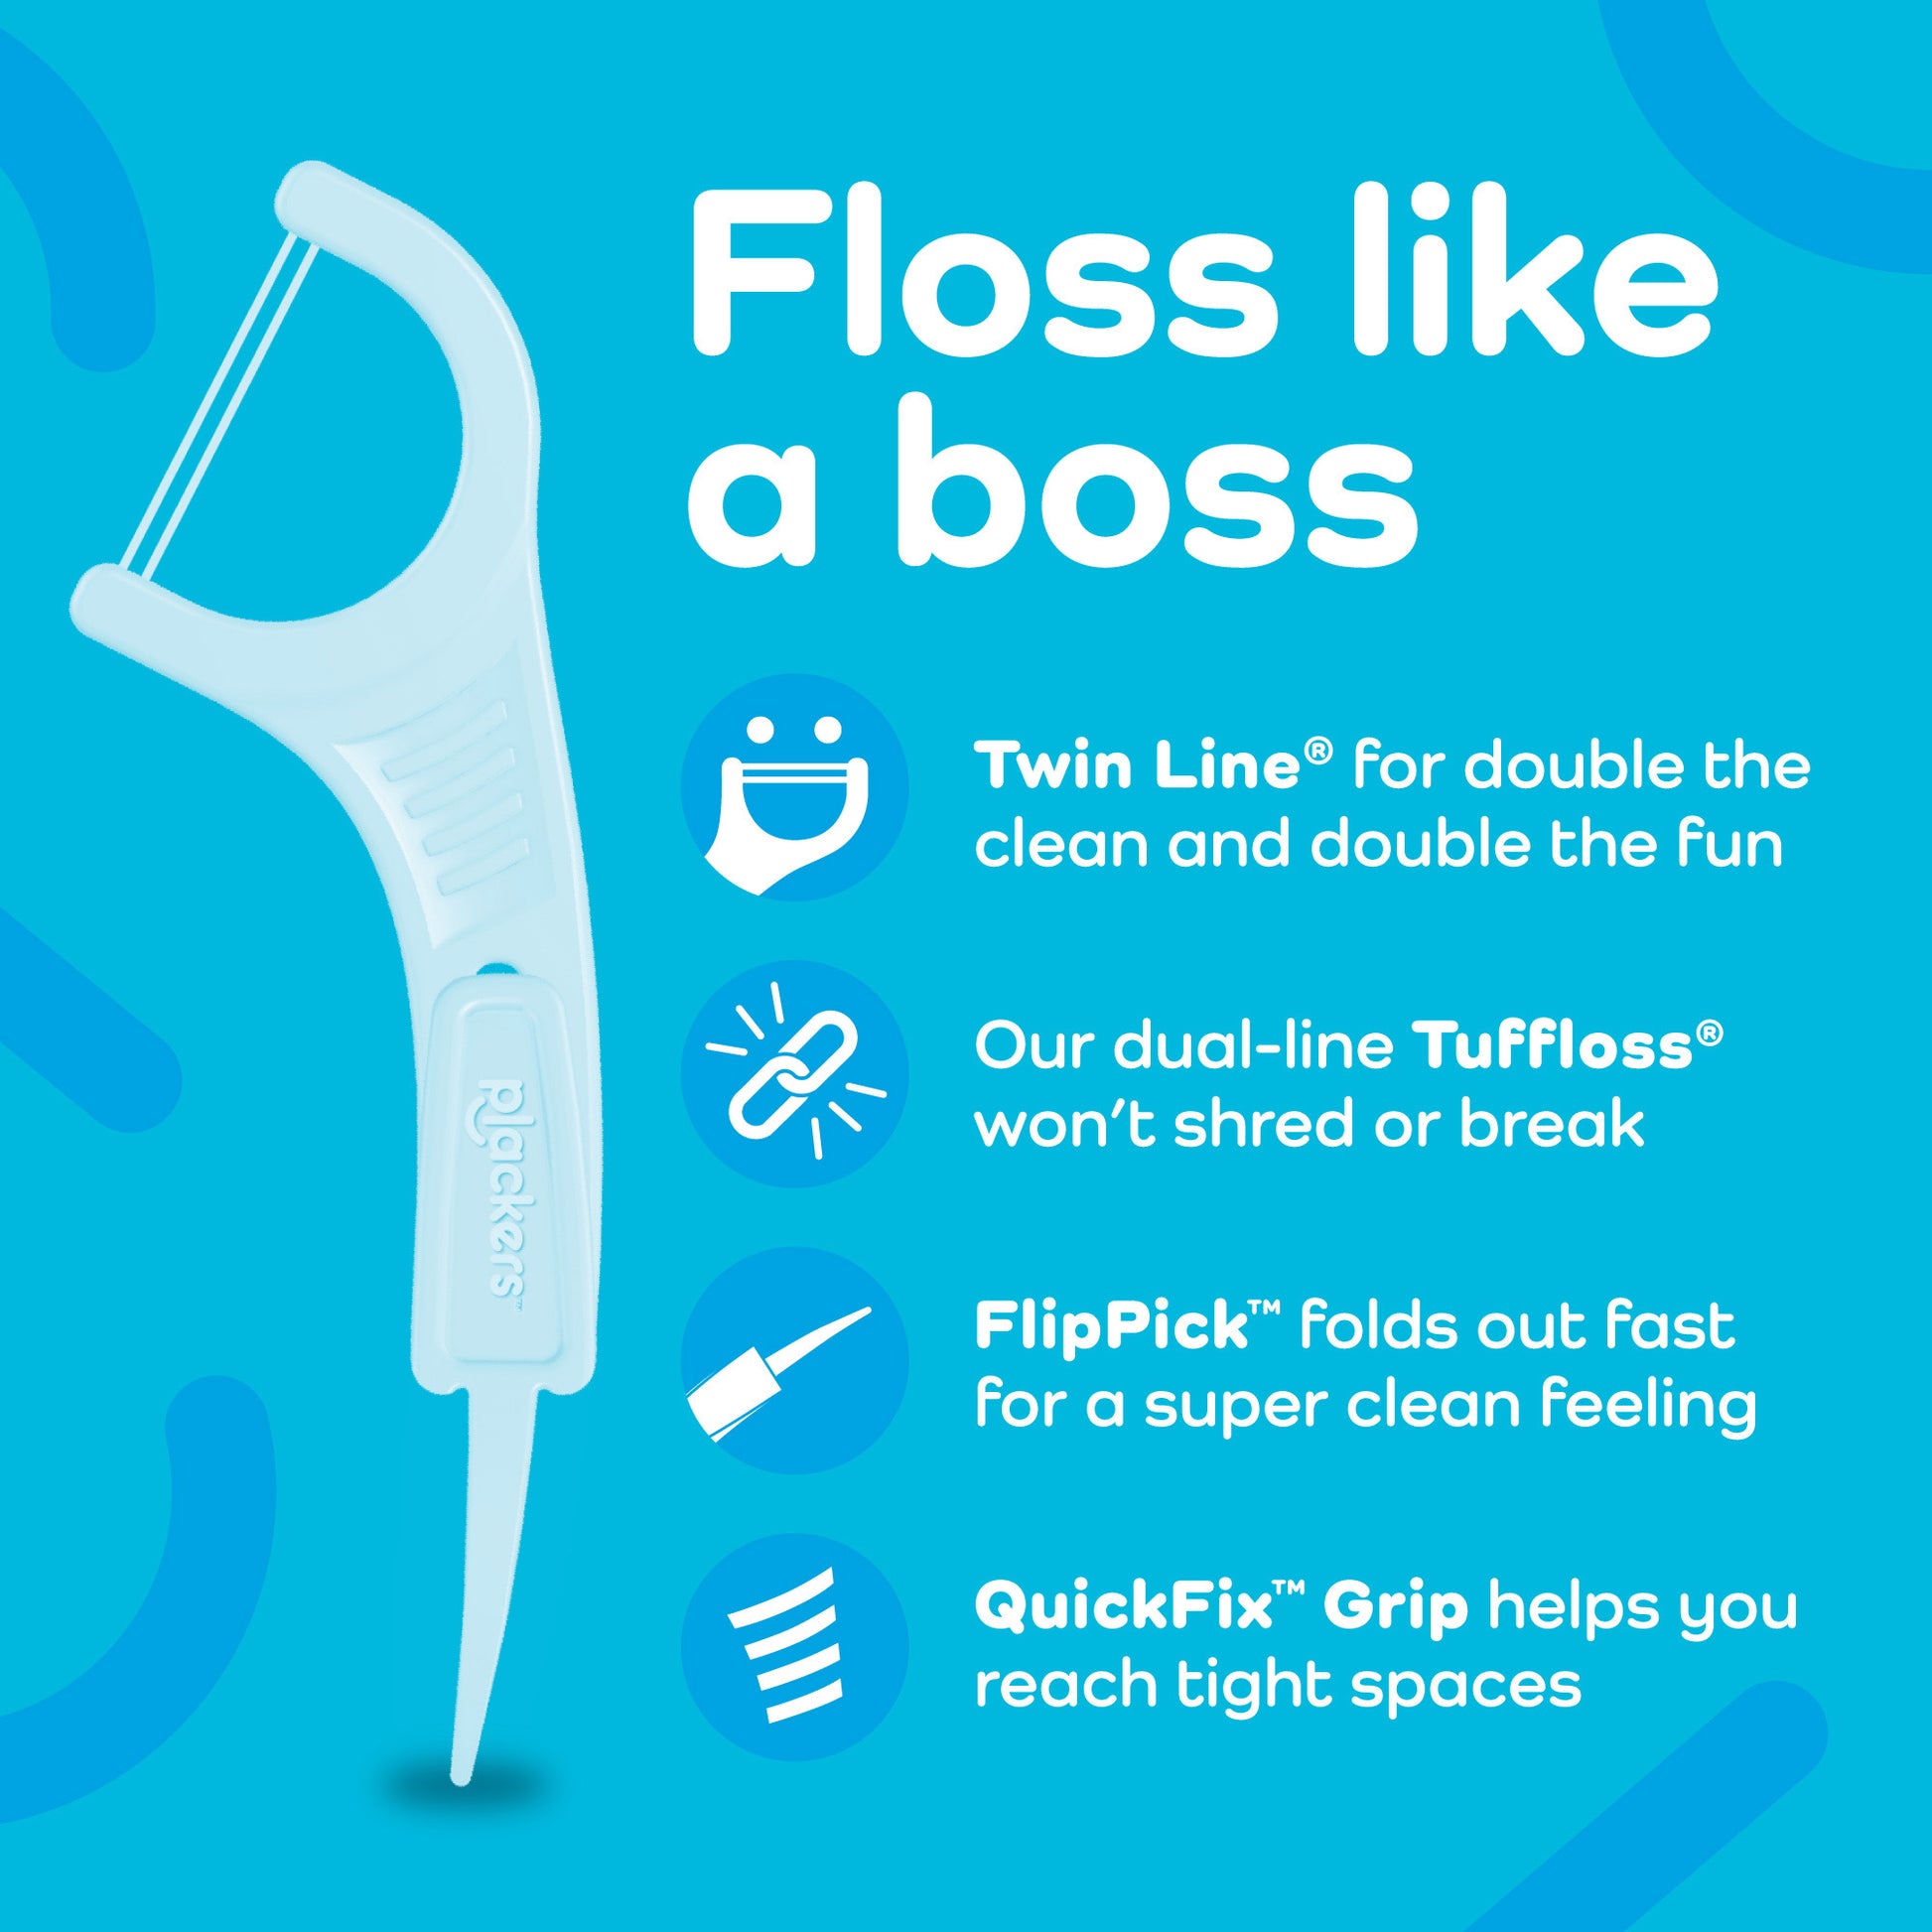 10 Uses for Floss that Don't Involve your Teeth! - Off the Cusp